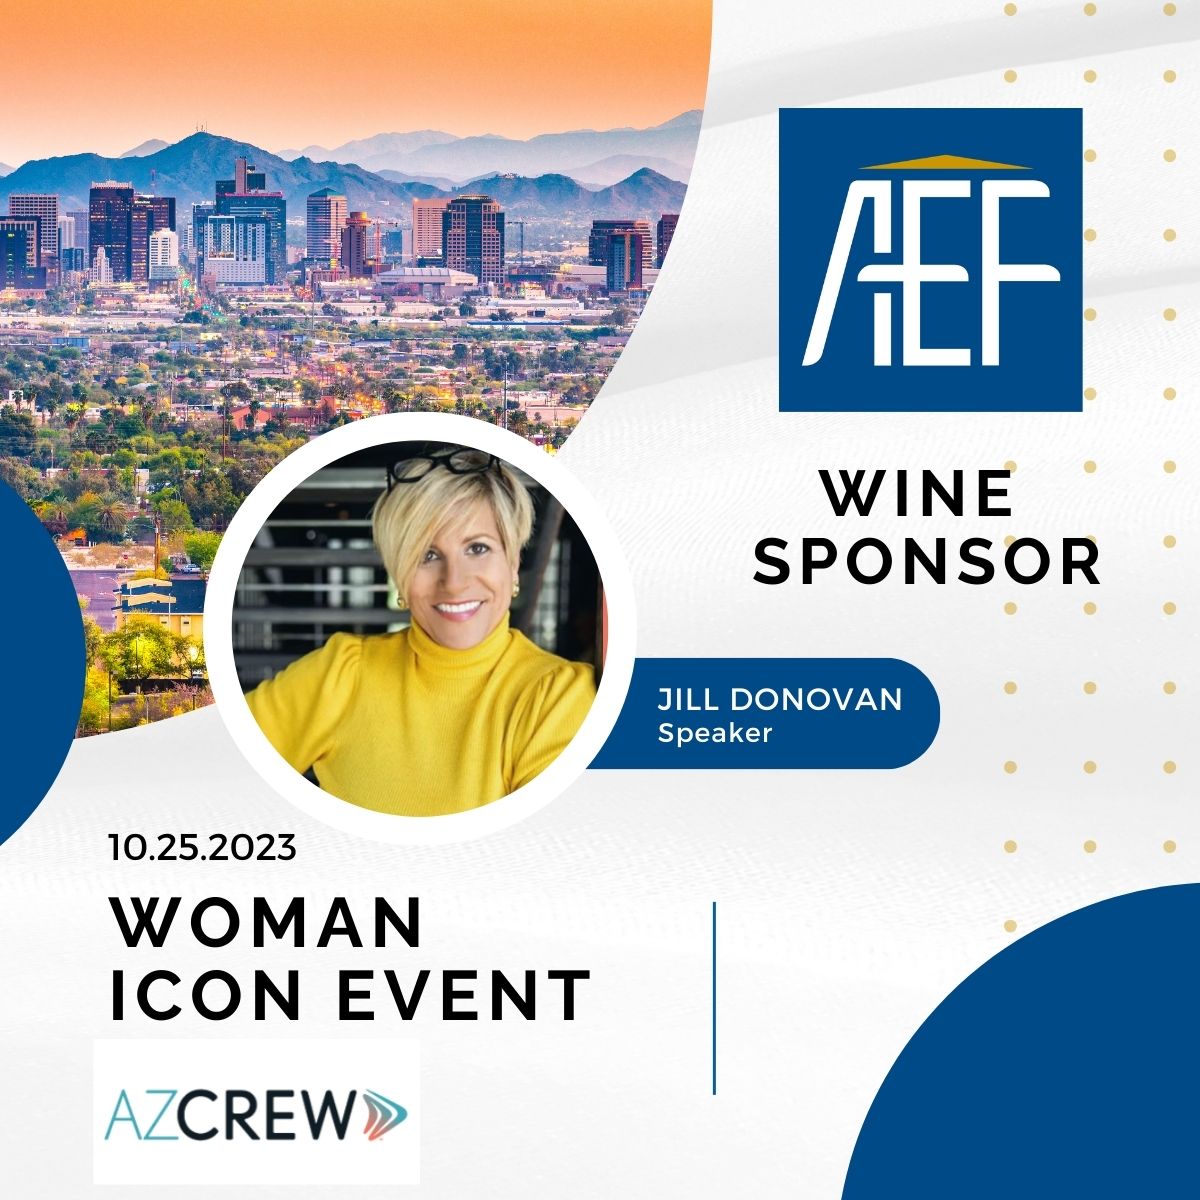 City of phoenix with text promoting Woman icon event for Arizona Escrow Wine Sponsor